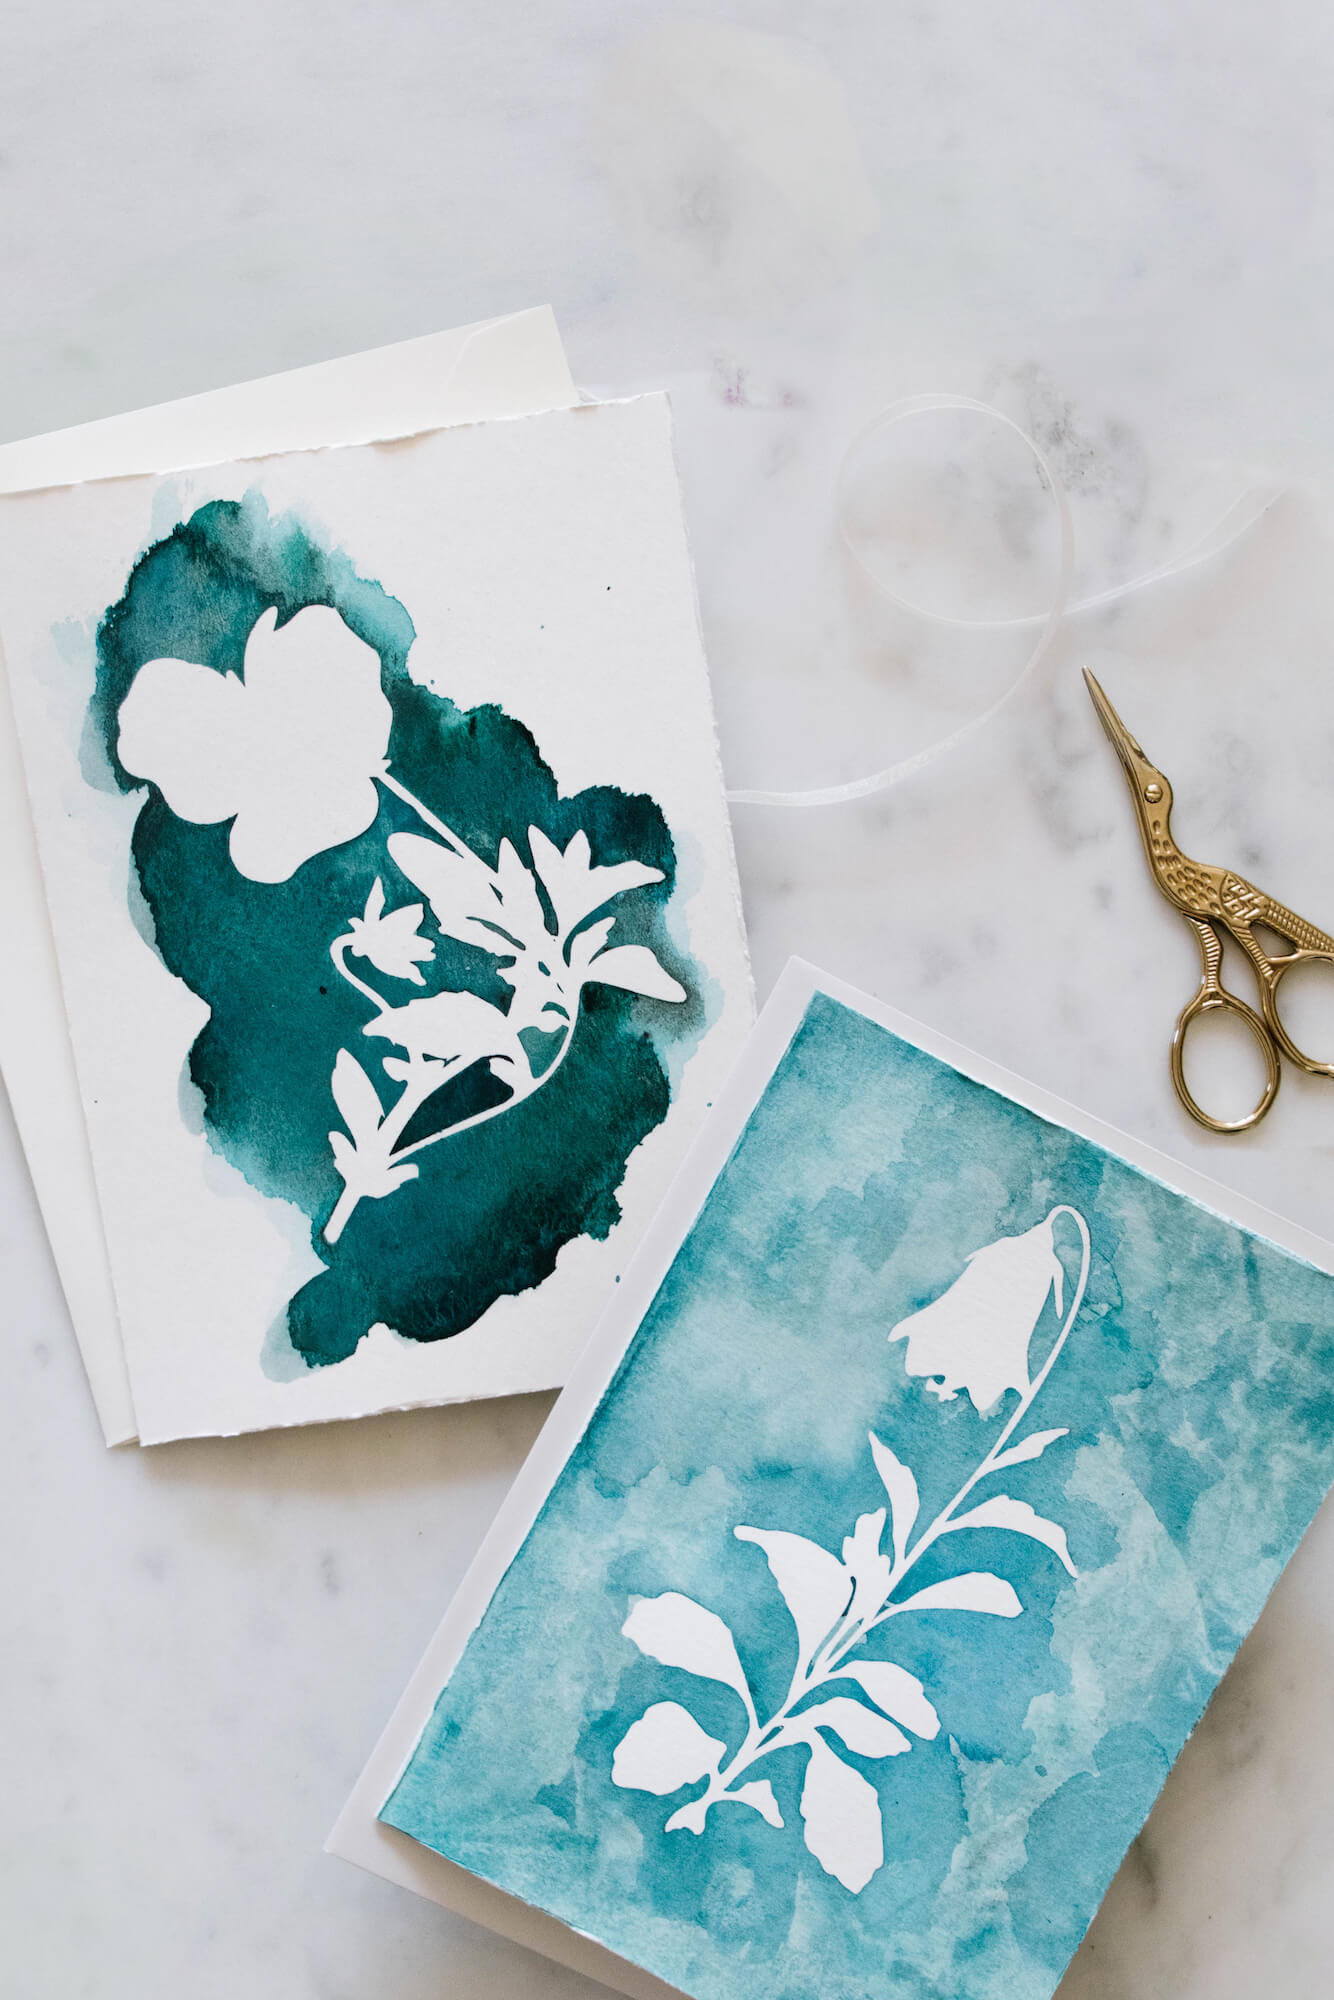 In just a few minutes, you'll create these beautiful botanical silhouette Cricut watercolor cards. Happy crafting!